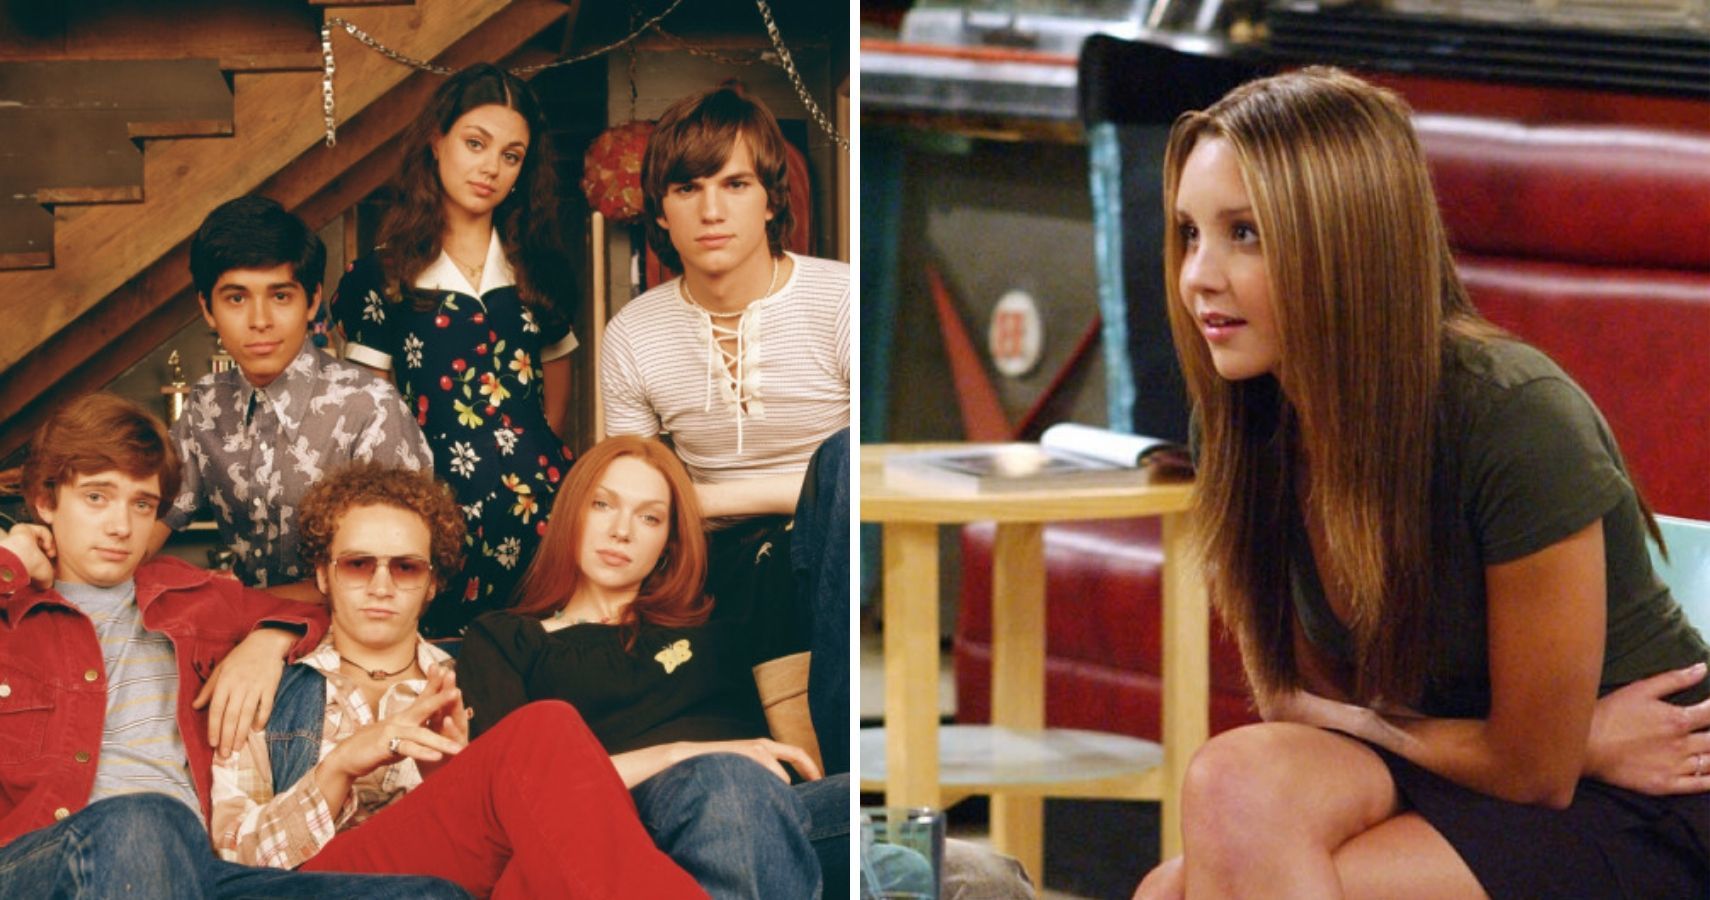 5 Sitcoms From The 00s That Are Way Underrated (& 5 That Are Overrated)